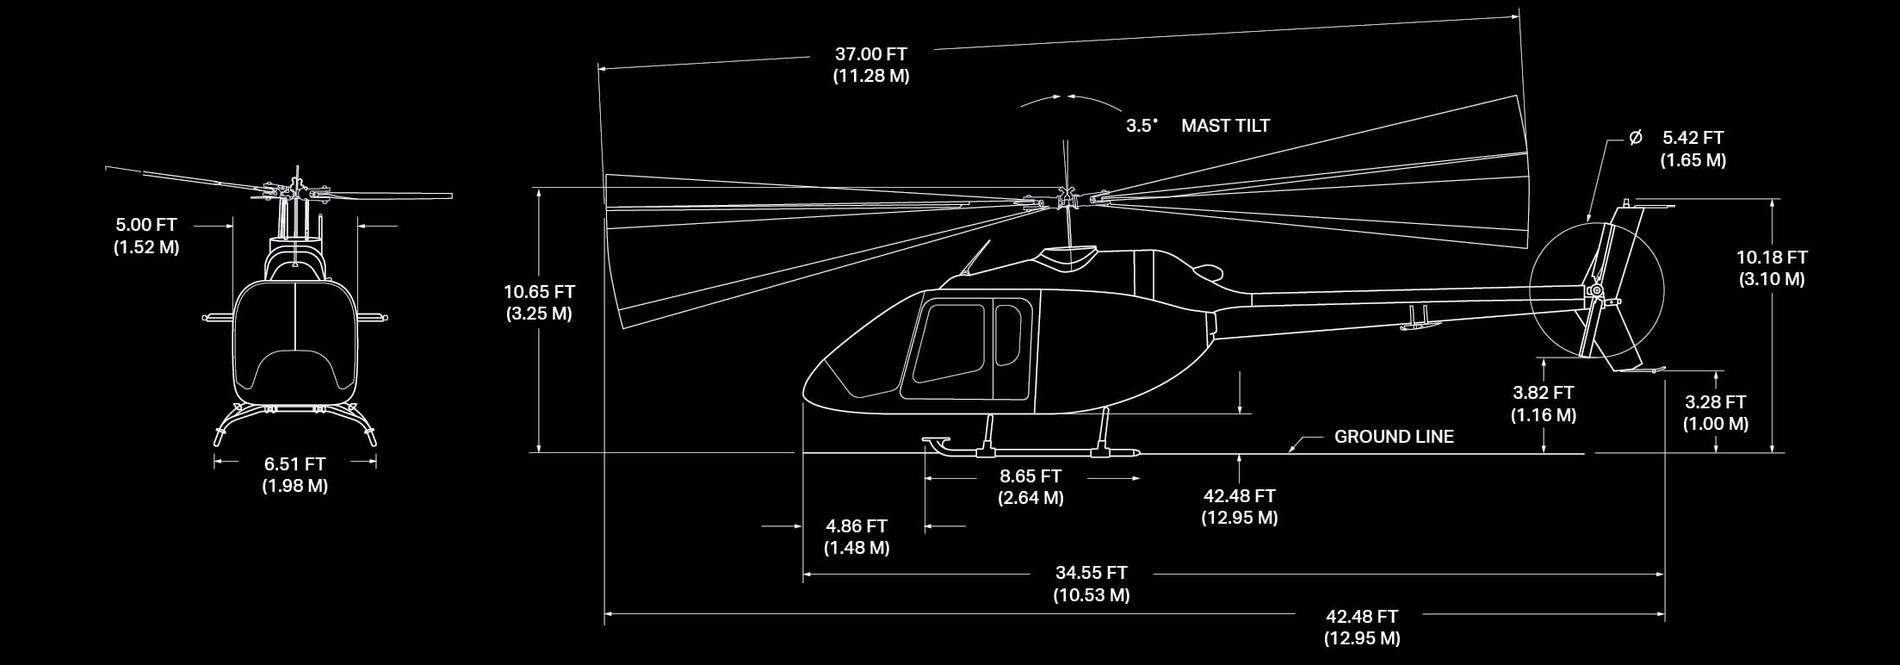 Bell 505 Specification Image